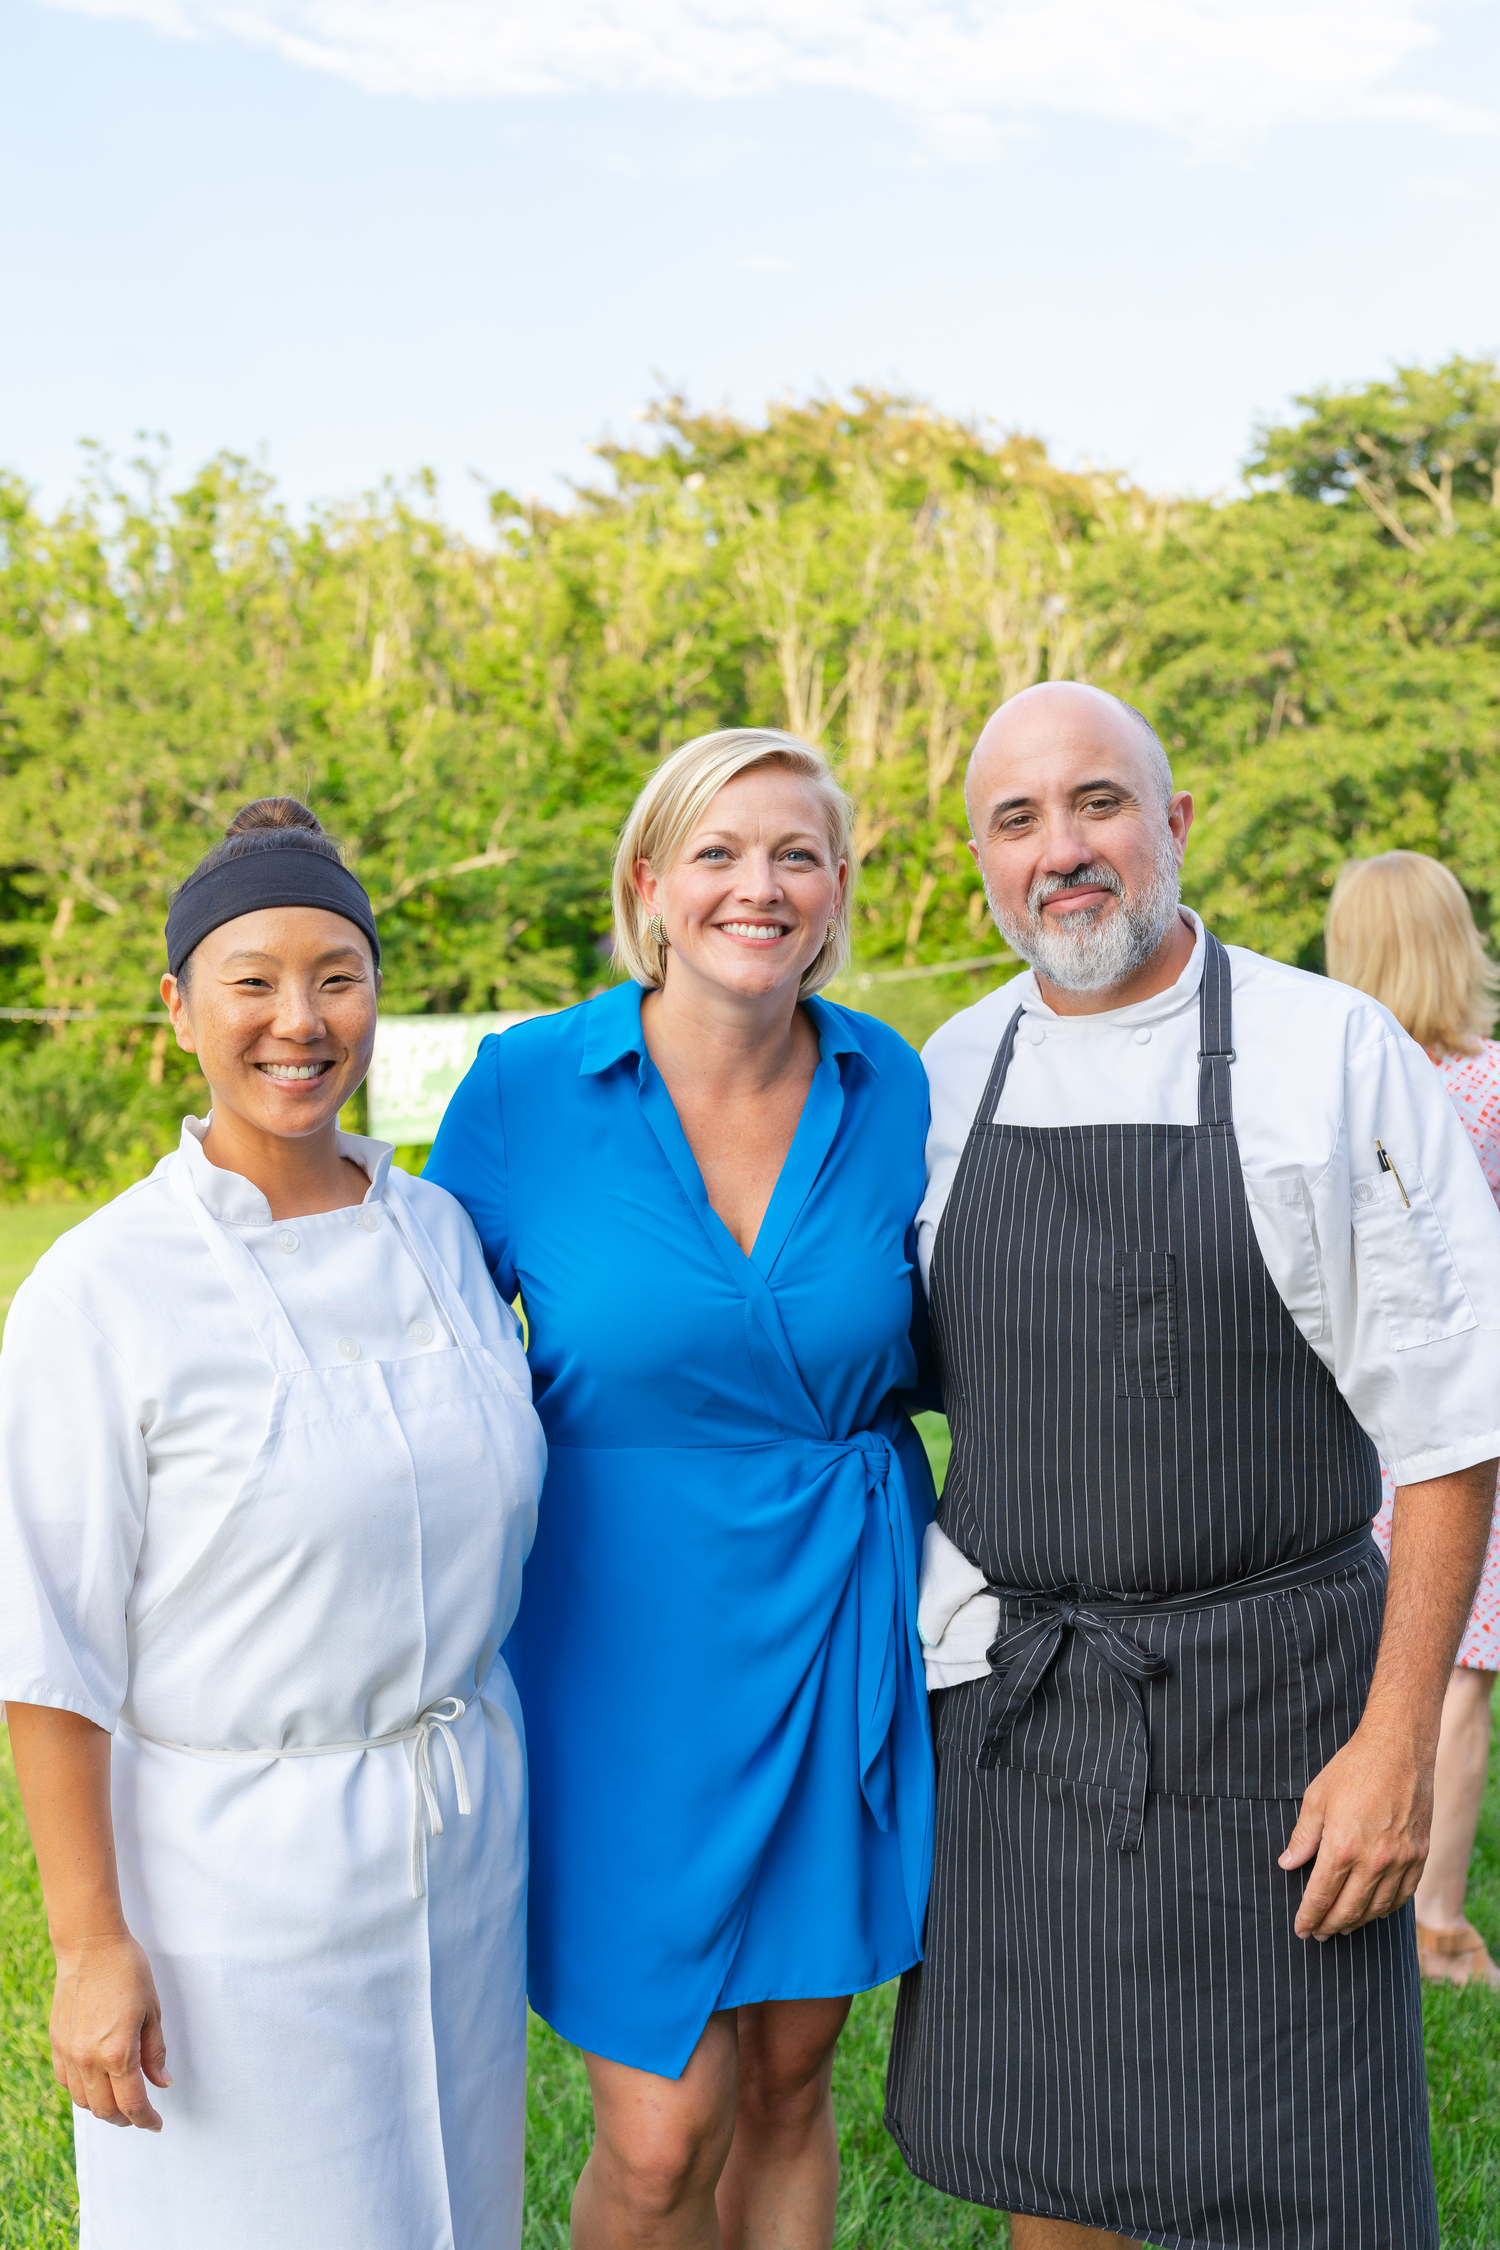 Pastry Chef Holly Dove-Rozzi of Nick & Toni’s, East End Food Executive Director Kate Fullam and Executive Chef Michael Rozzi of The 1770 House. CORINNE TOUSEY